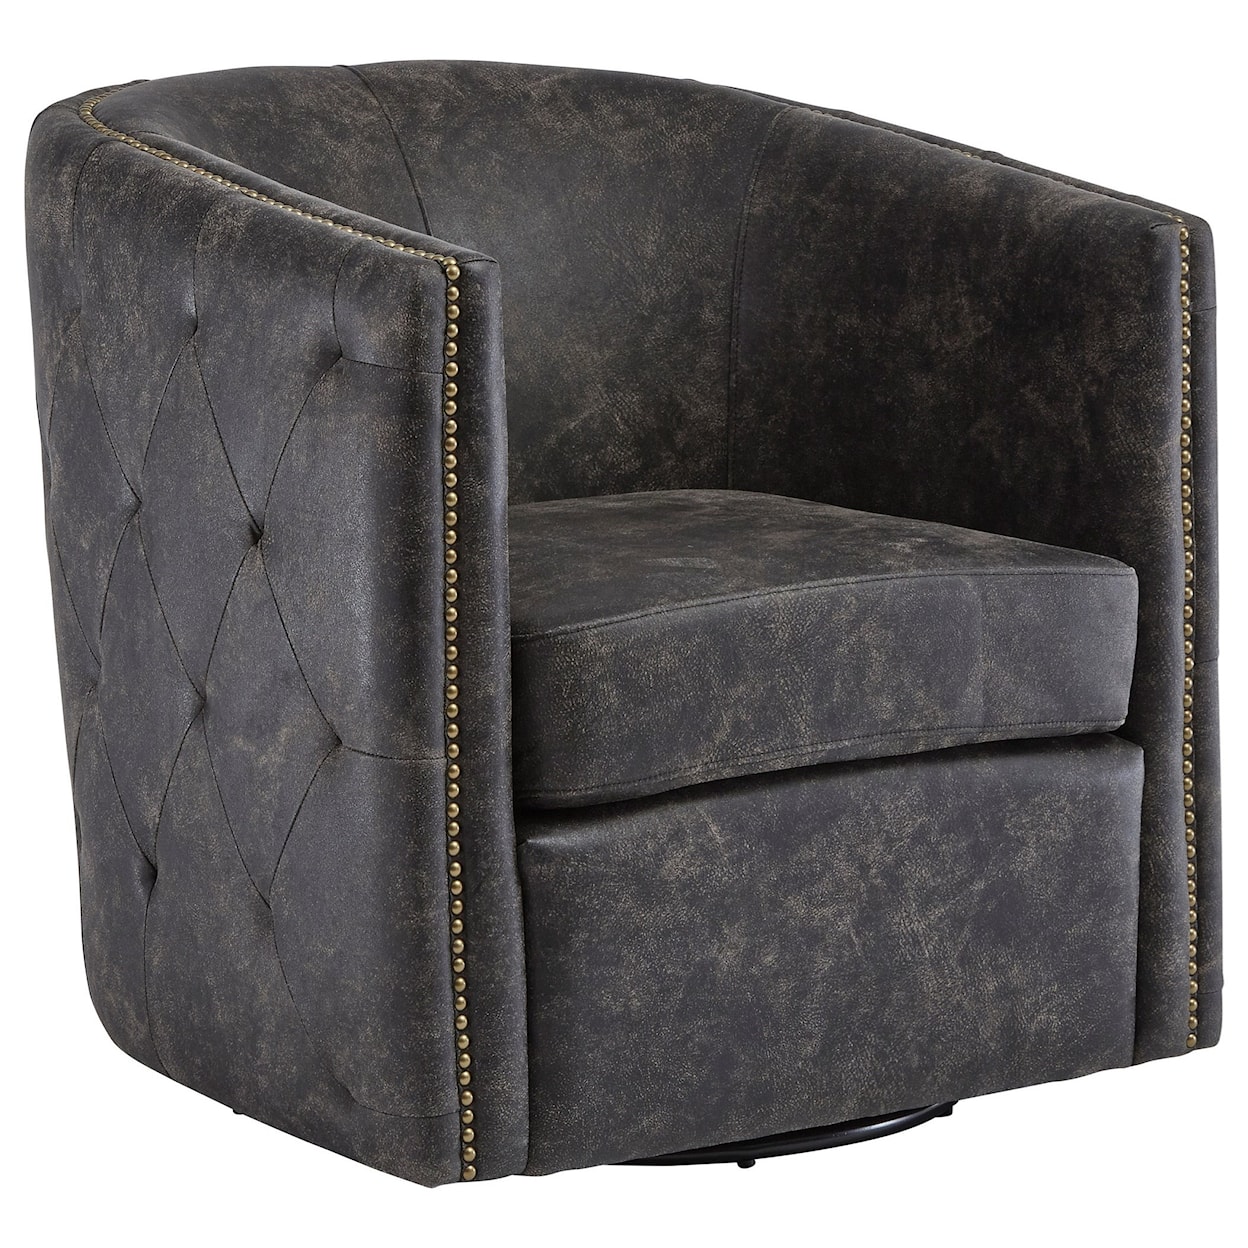 Signature Design by Ashley Brentlow Swivel Chair